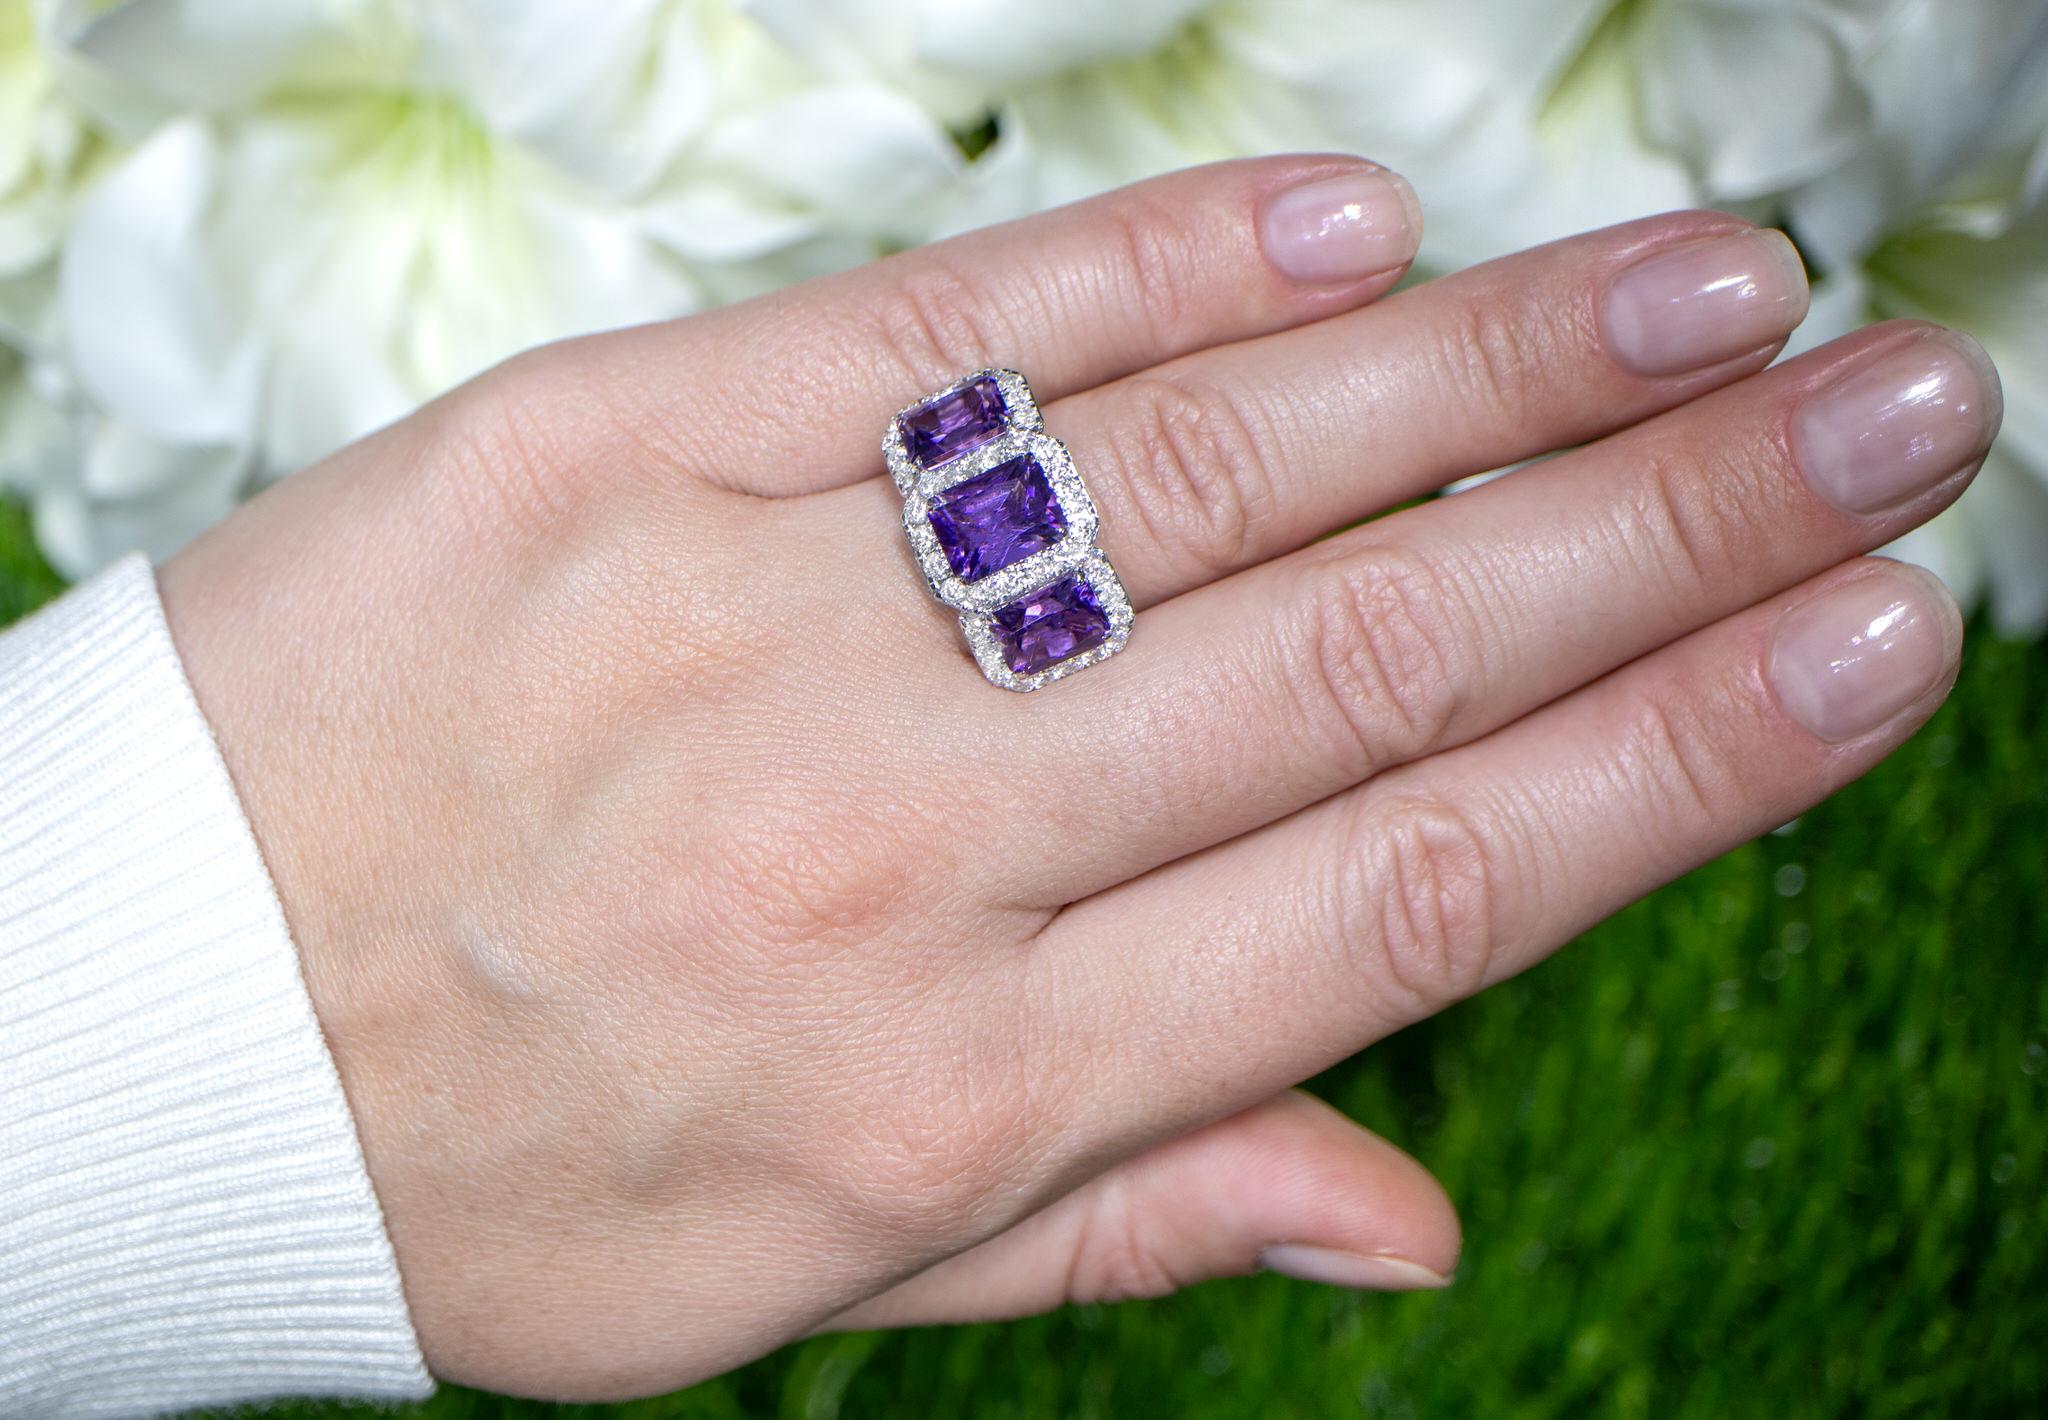 It comes with the Gemological Appraisal by GIA GG/AJP
All Gemstones are Natural
Amethysts = 5.51 Carats
Diamonds = 1.12 Carats
Metal: 18K White Gold
Ring Size: 6.25* US
*It can be resized complimentary